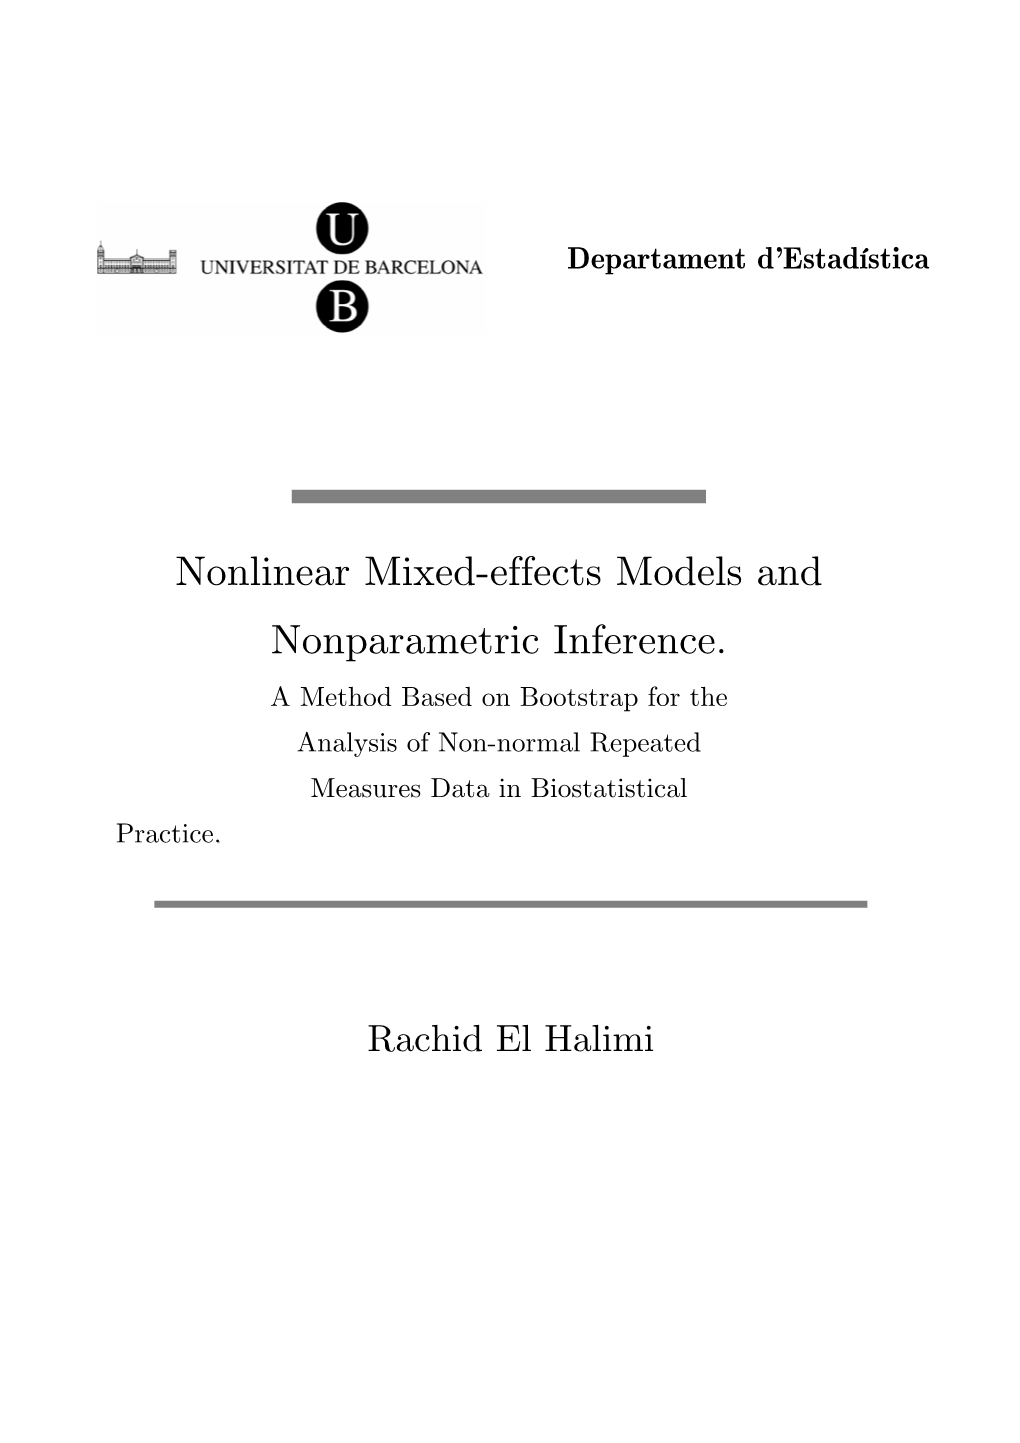 Nonlinear Mixed-Effects Models and Nonparametric Inference